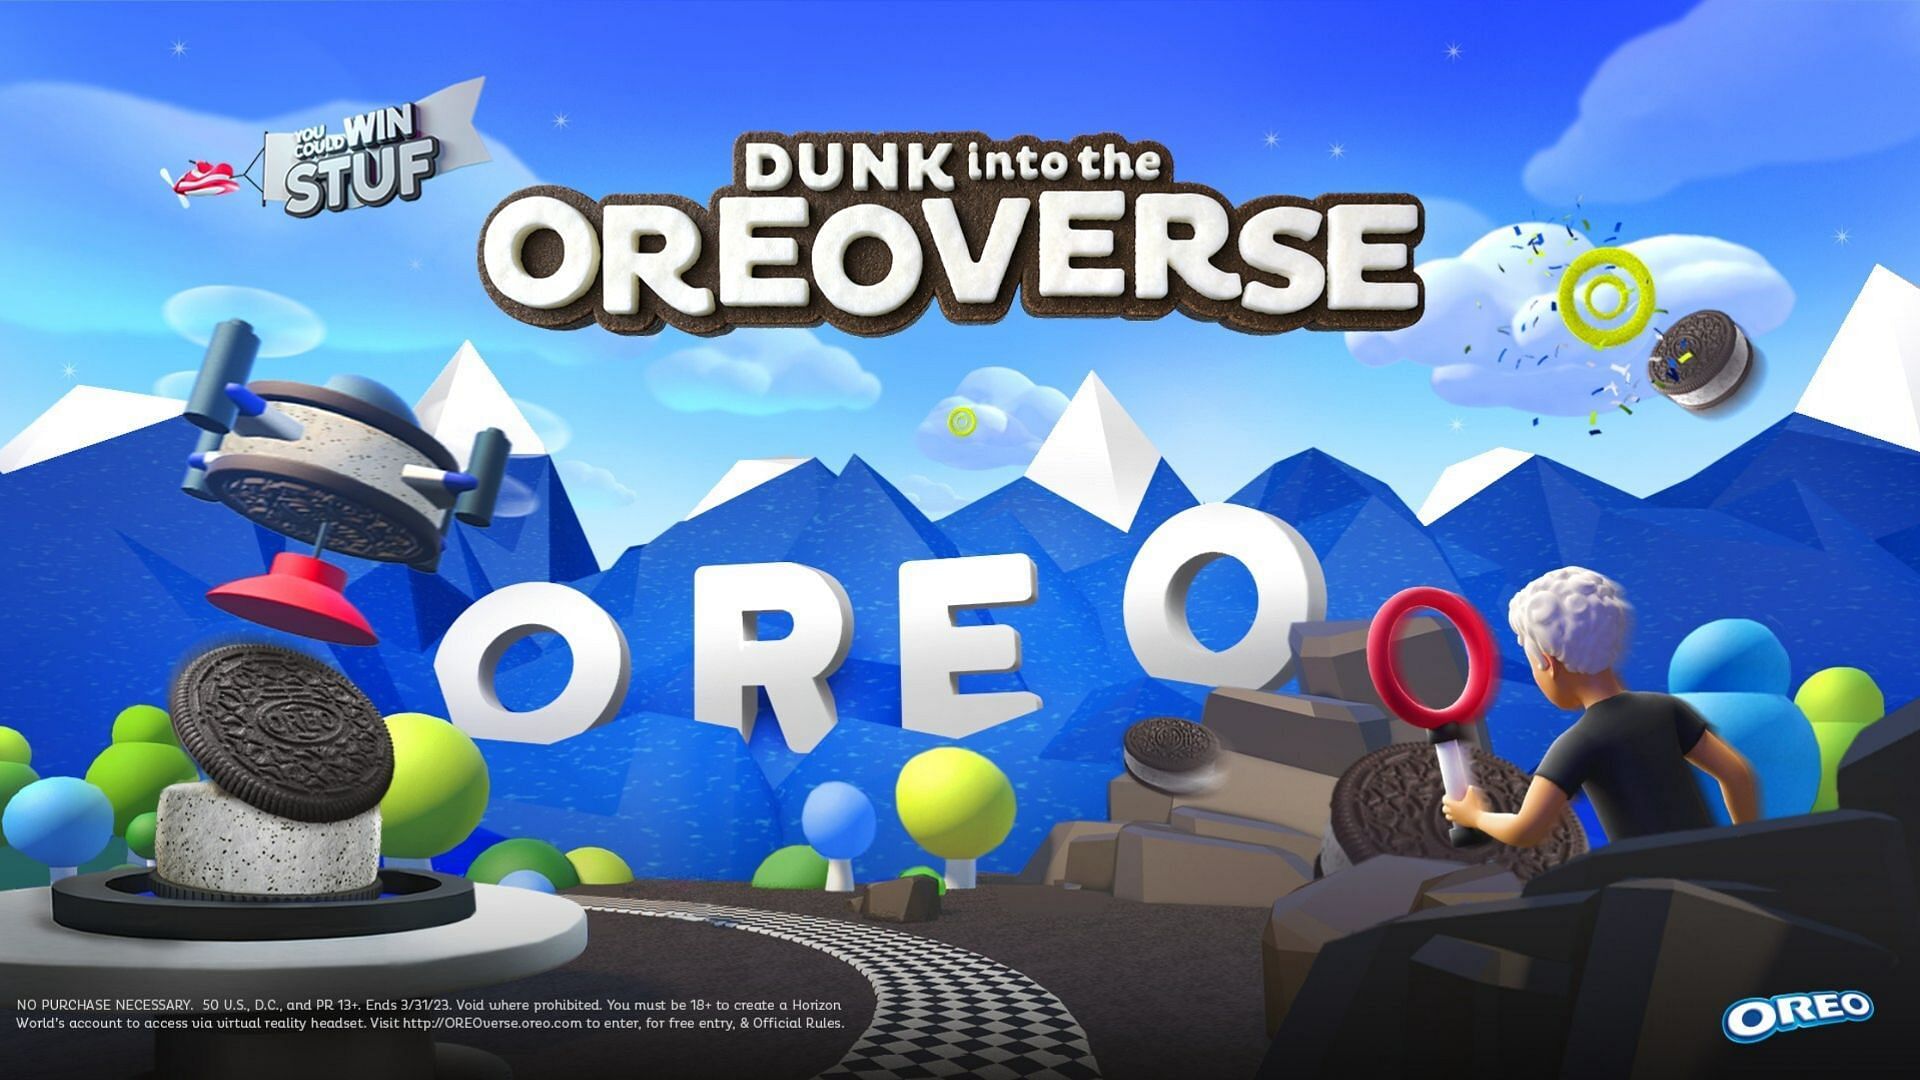 scan the QR code on the Most OREO OREO cookie wrapper to enter the OREOVERSE (Image via Oreo)